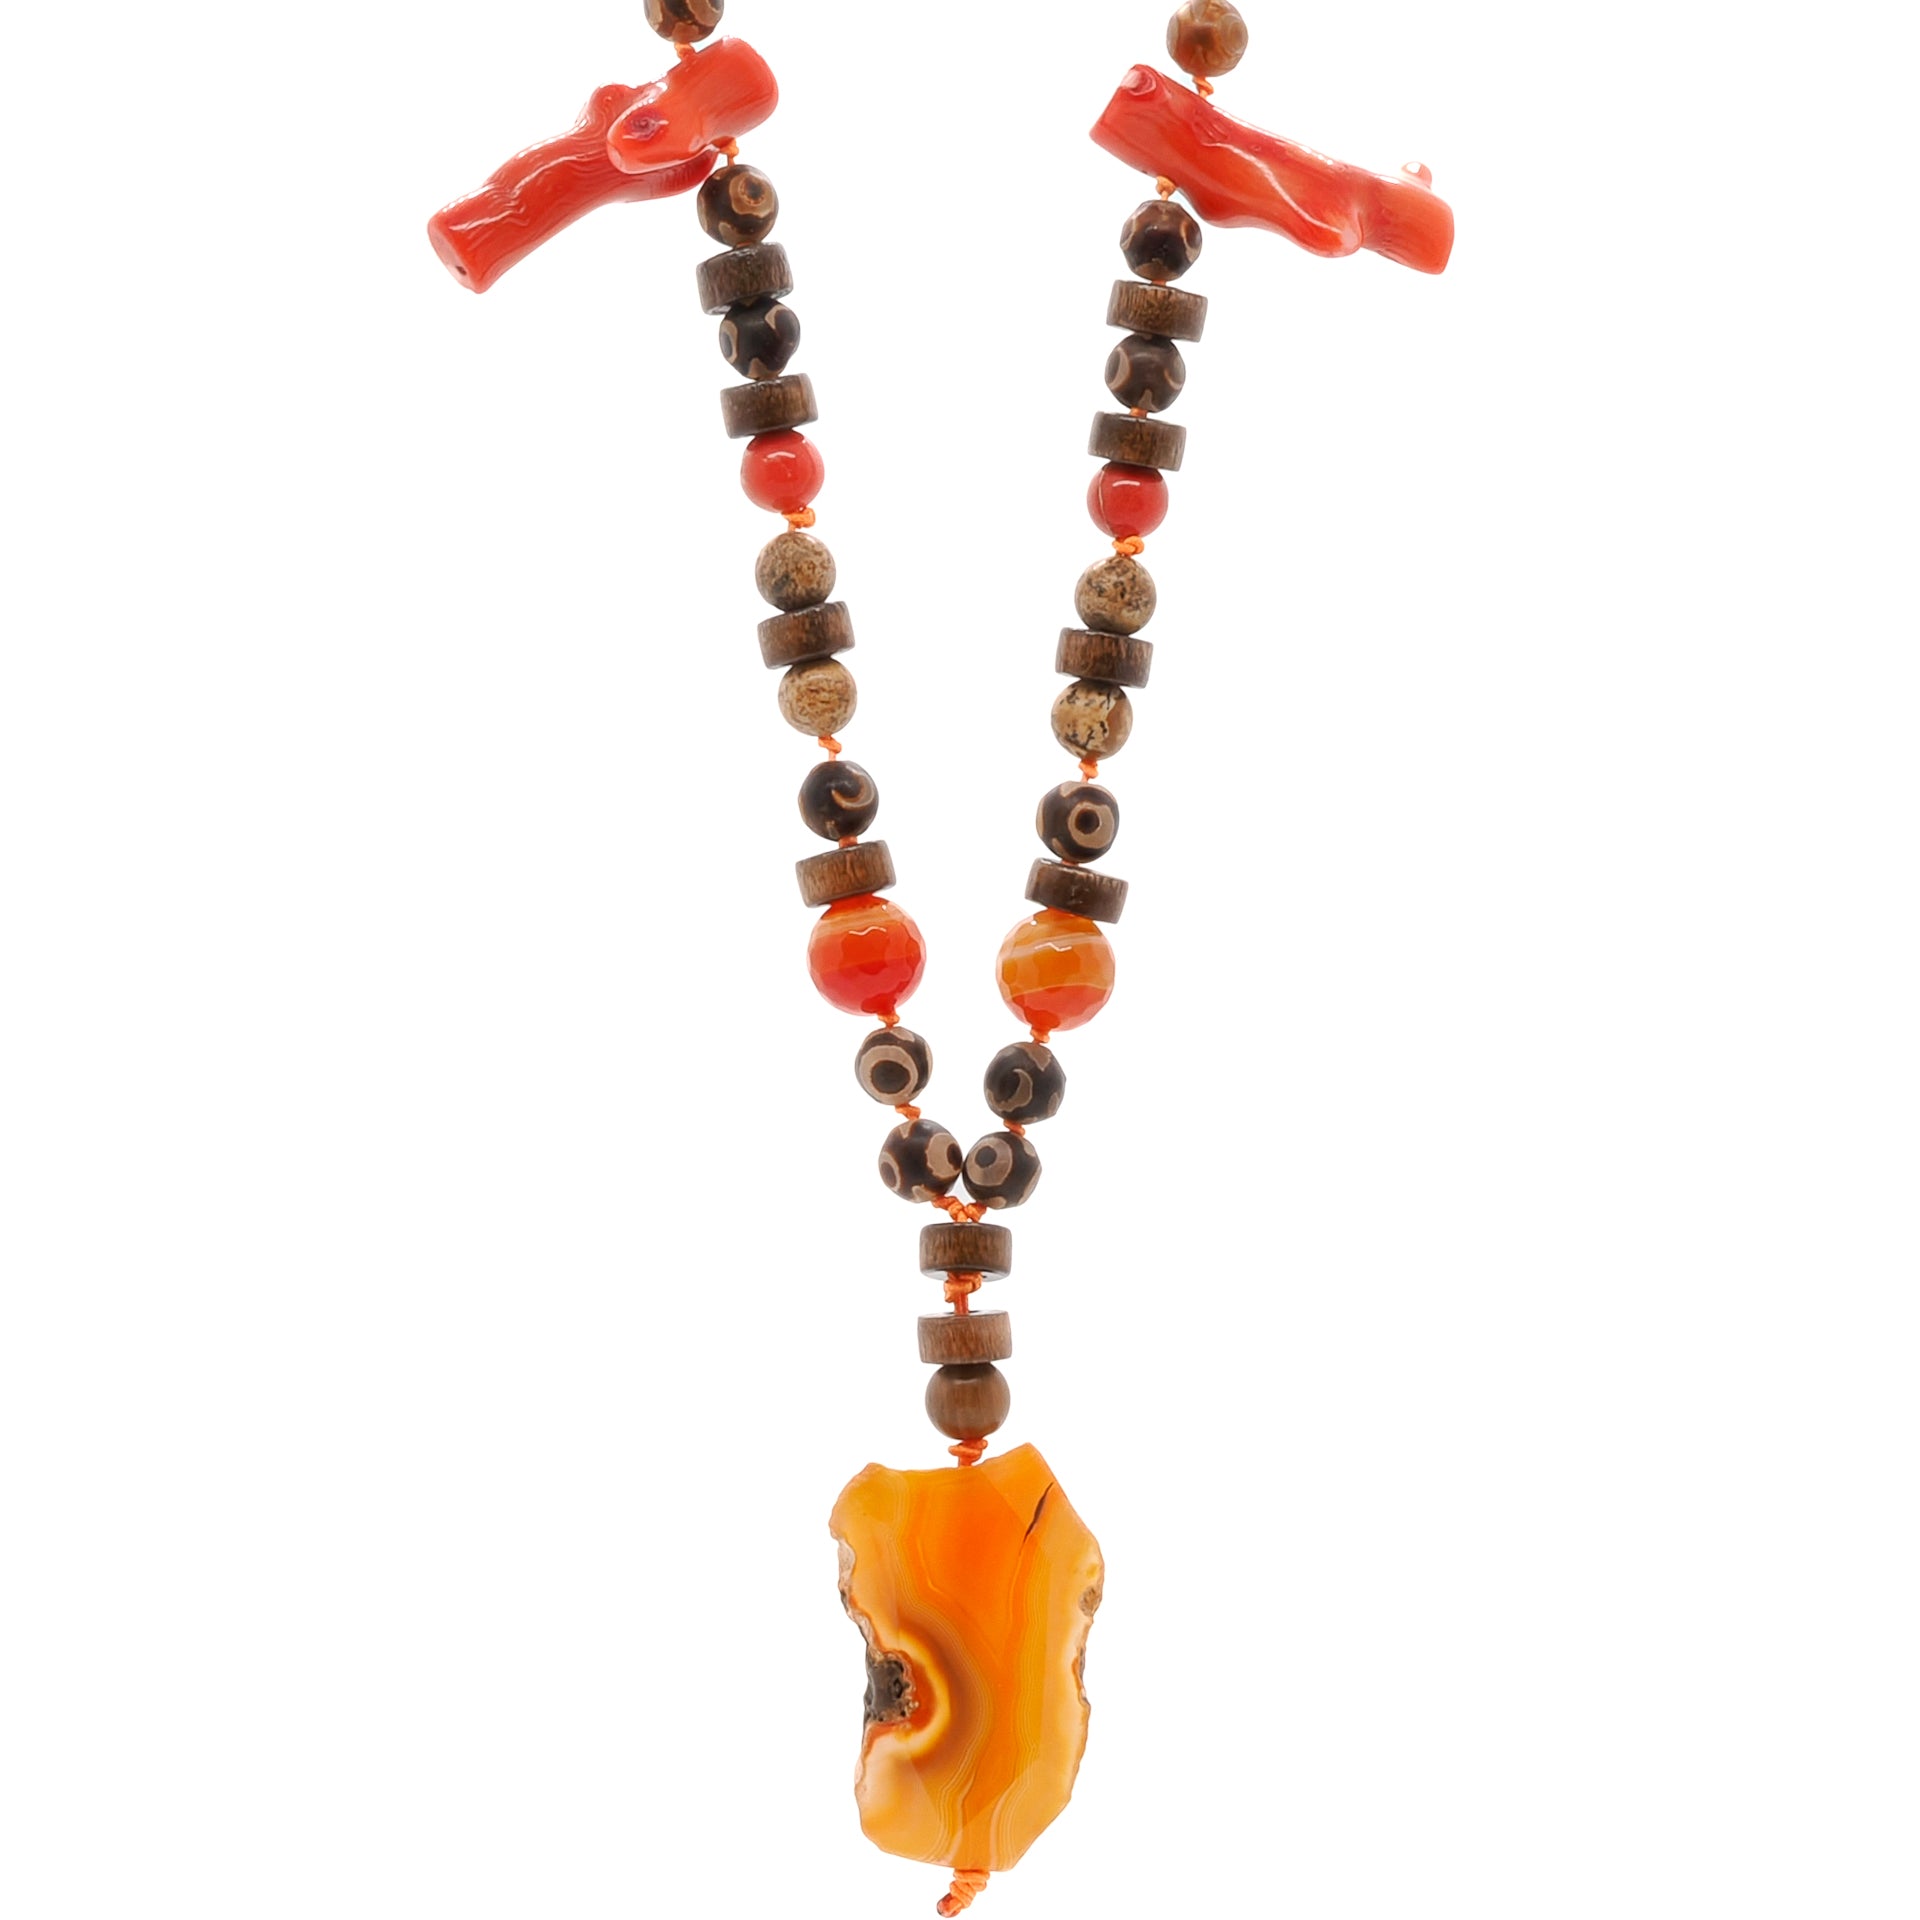 Close-up of the Healing Agate Necklace showcasing the vibrant orange agate pendant, with its unique patterns and smooth surface, making it a focal point of the necklace.